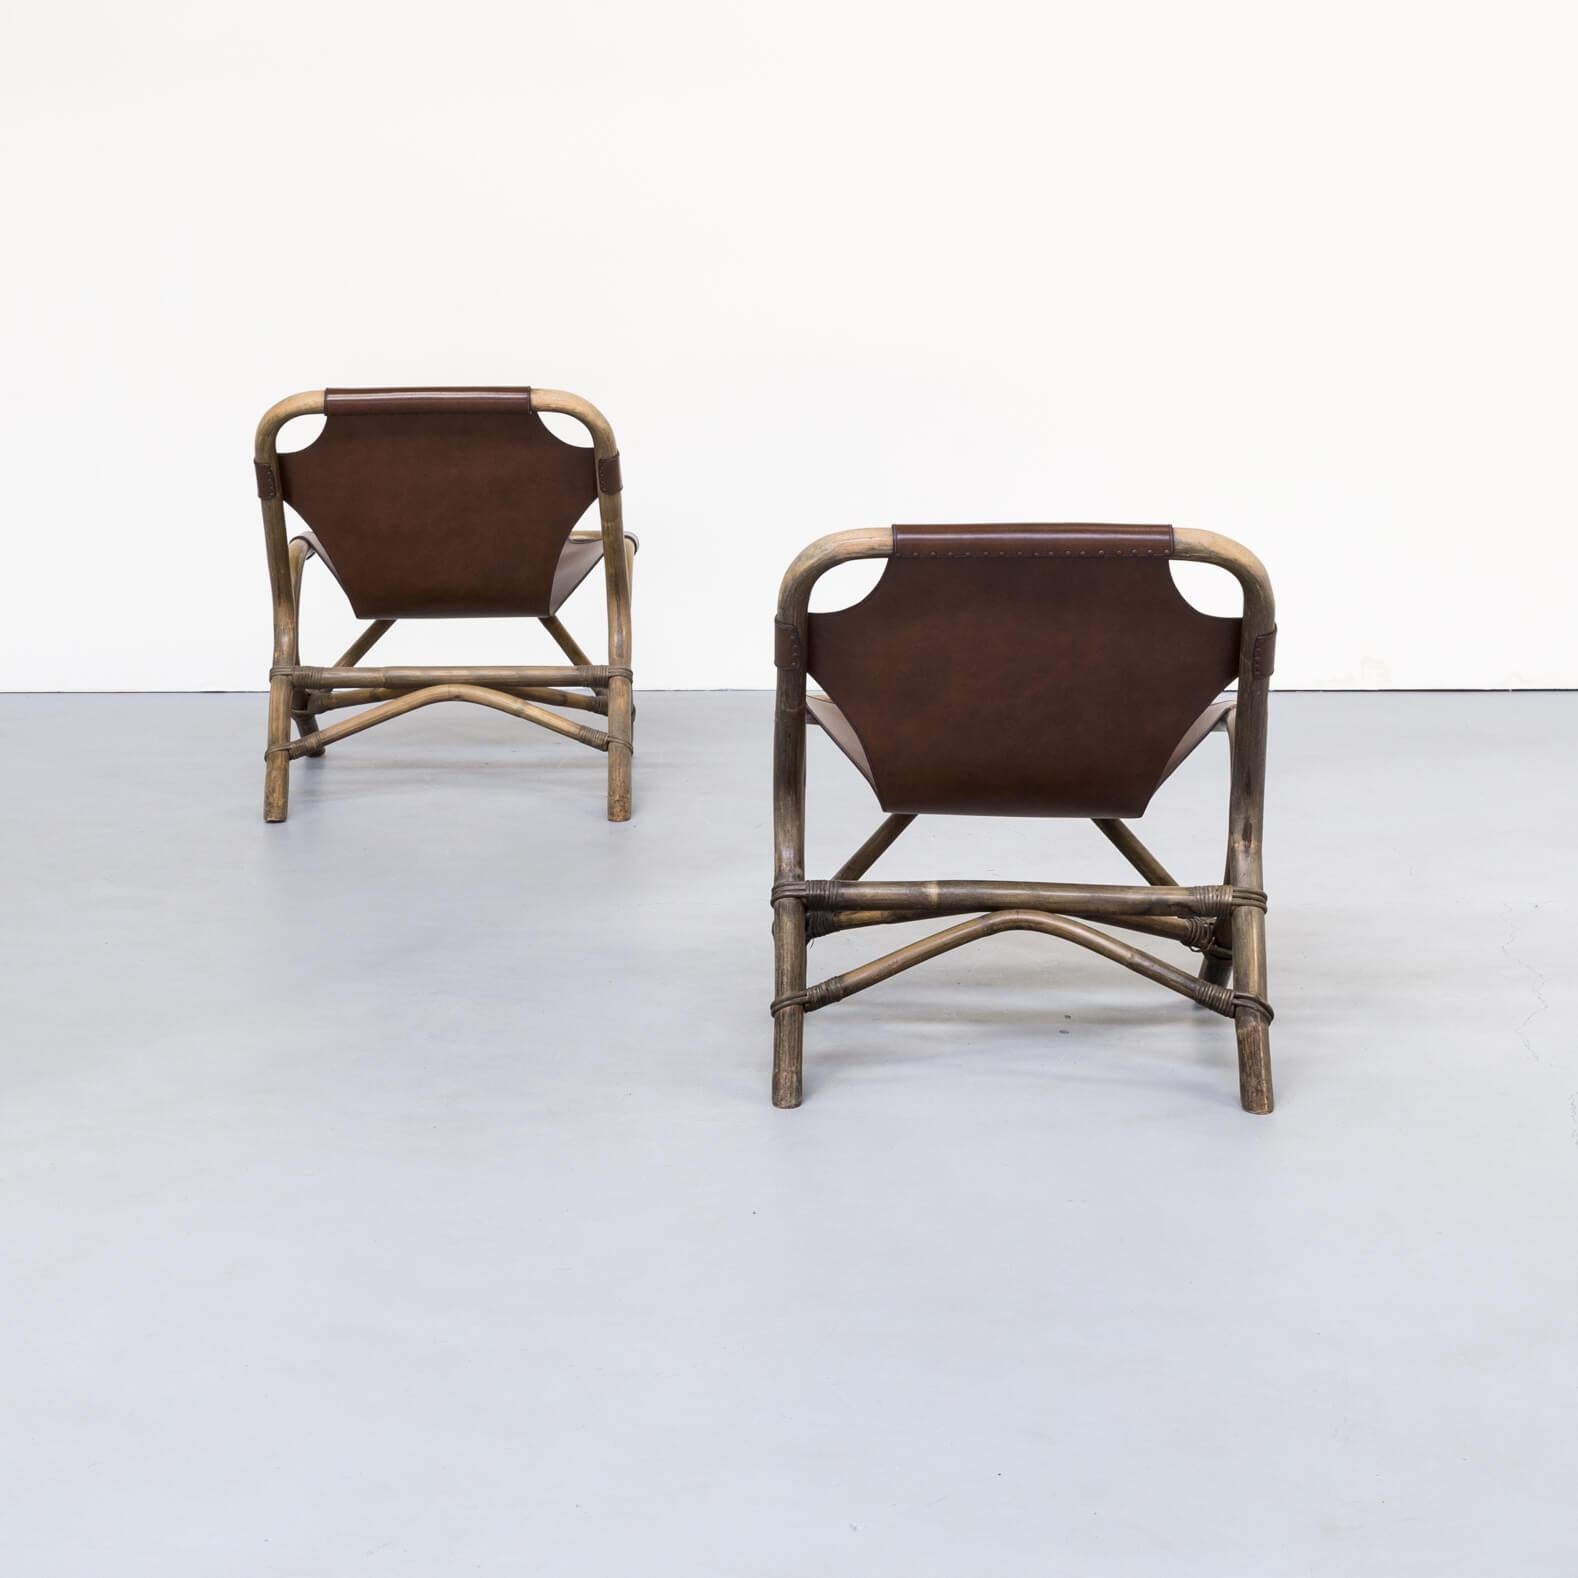 1980s Skai Leather Lounge Chairs, Bamboo Frame For Sale 2